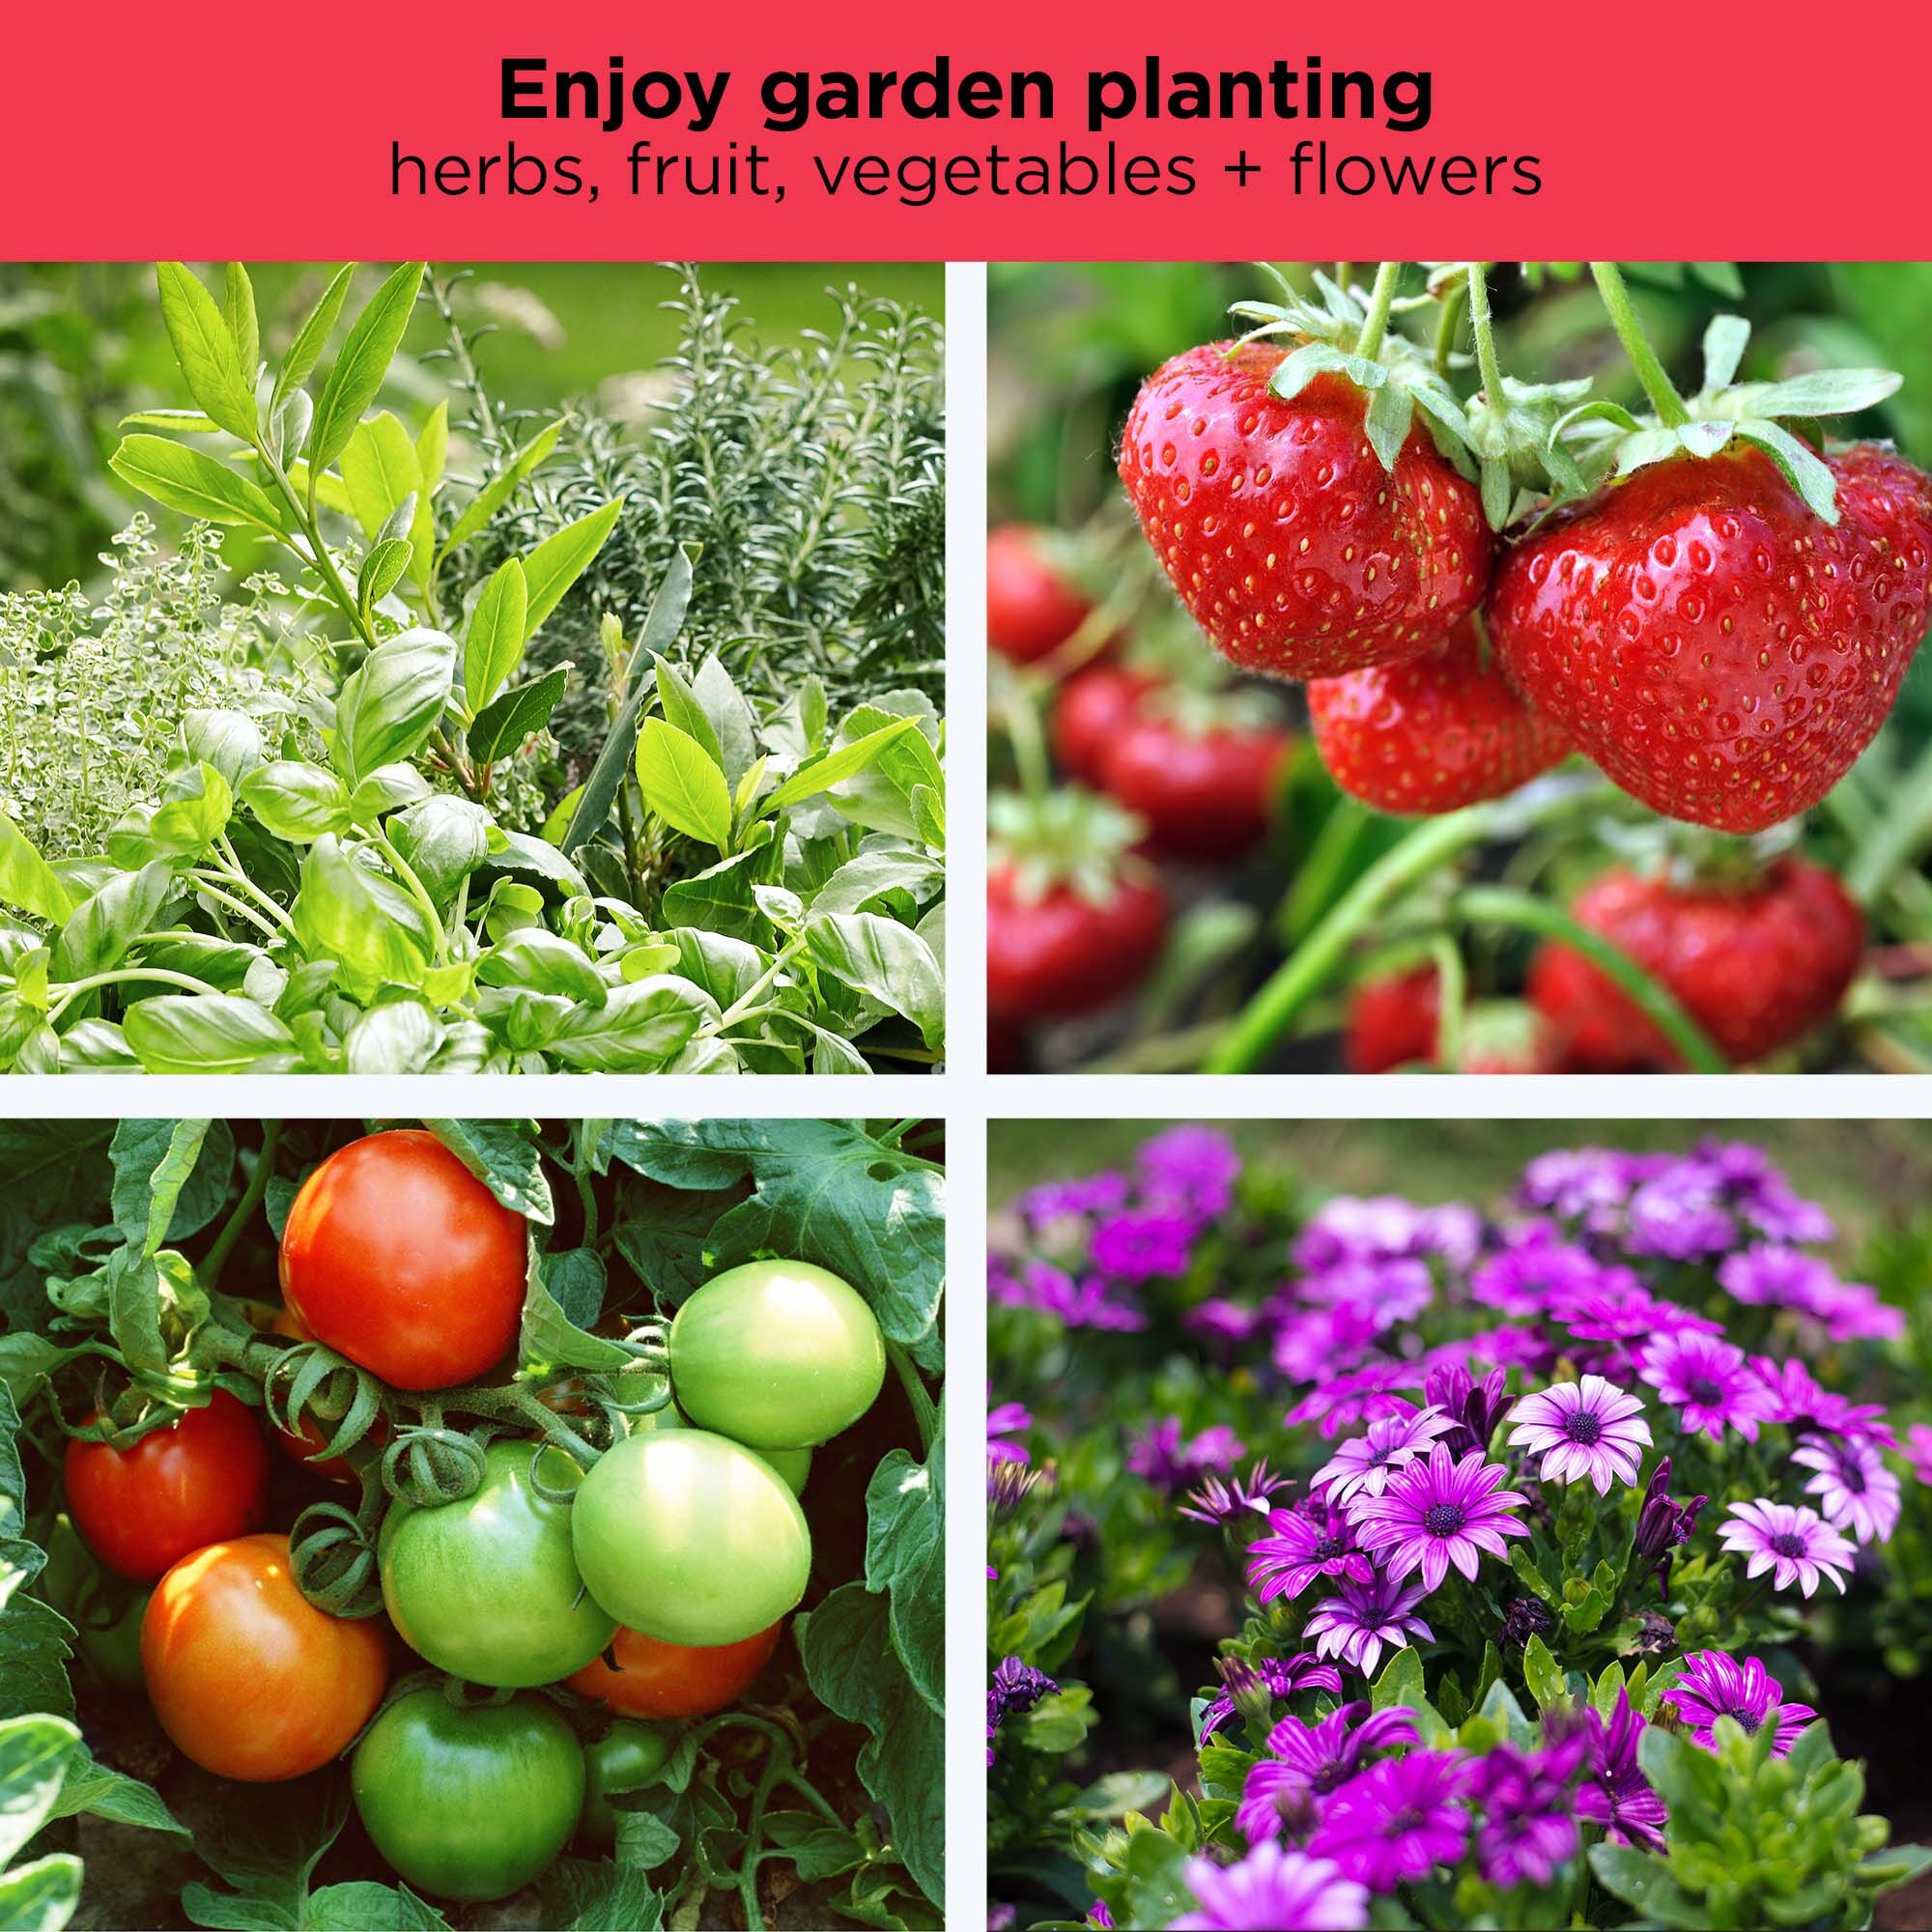 4 pictures of various herbs, fruit and vegetables